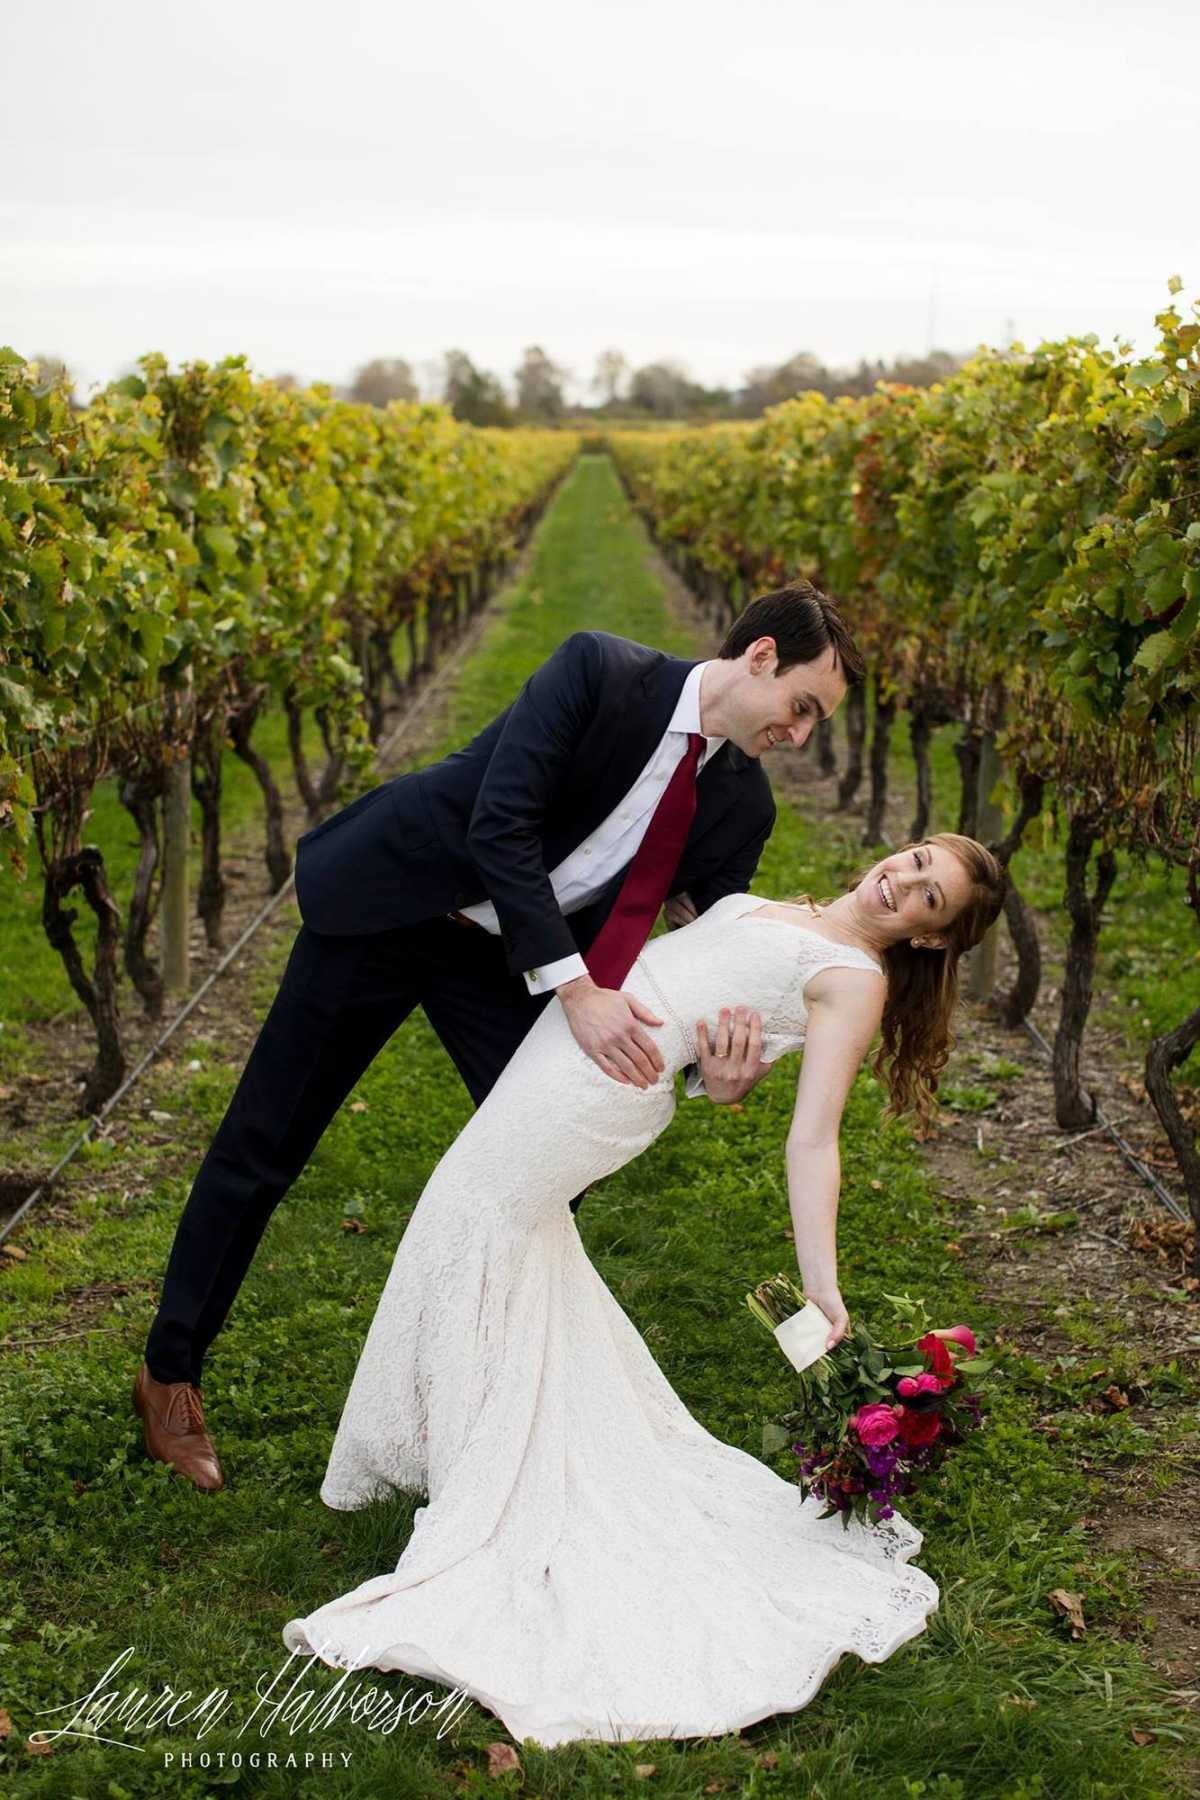 Groom Drops Bride During a 'Dip Kiss' & It's Actually